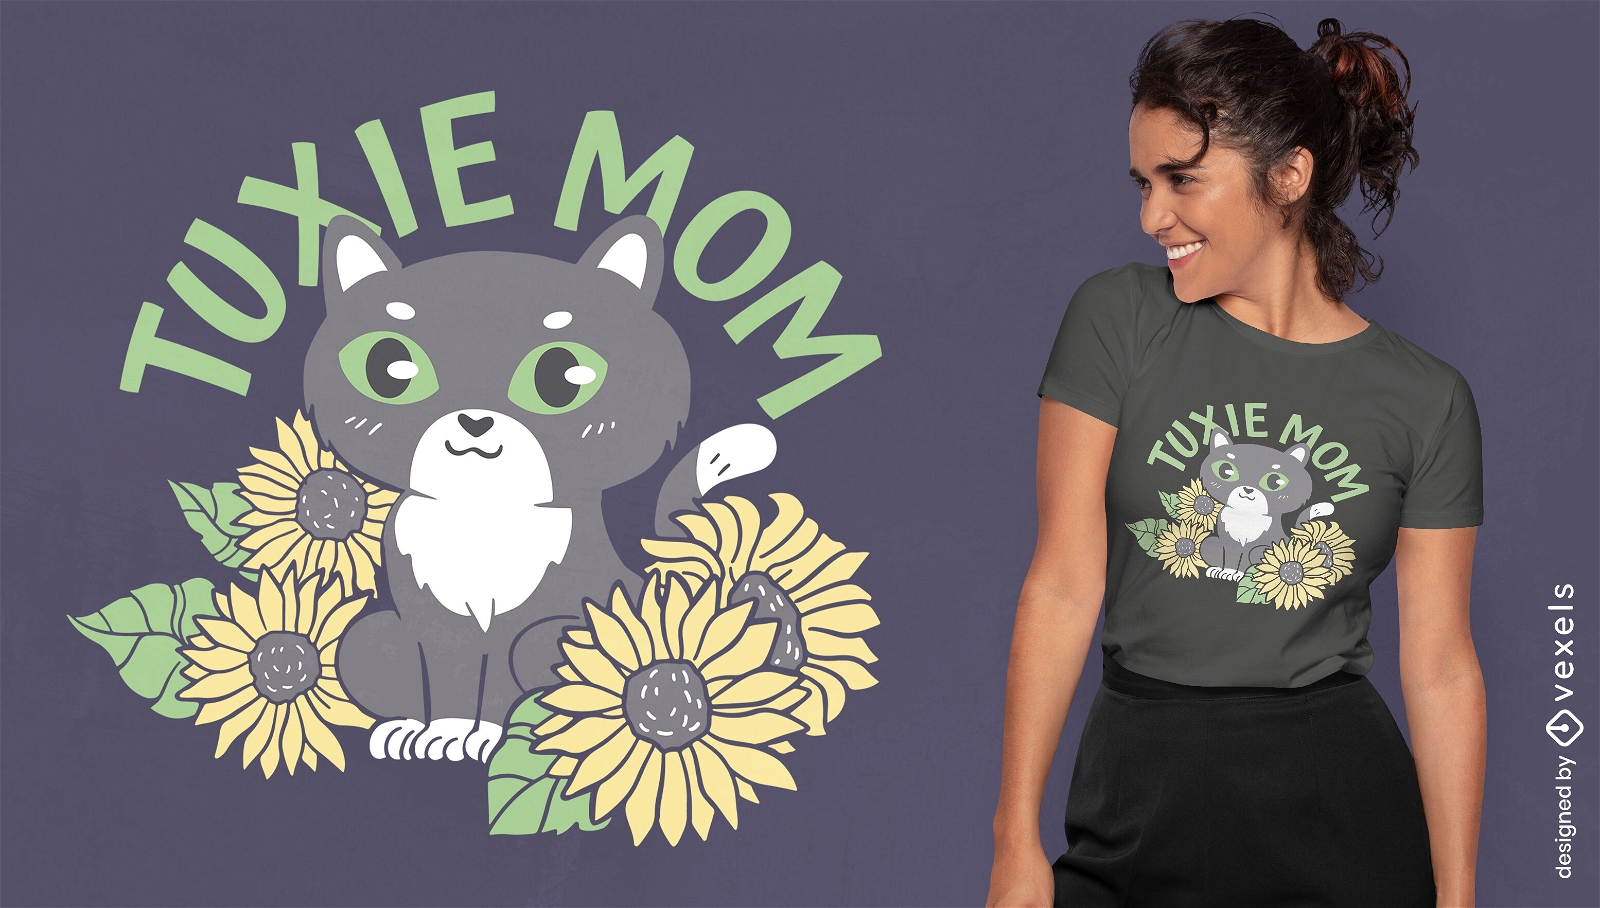 Cute cat with sunflowers t-shirt design